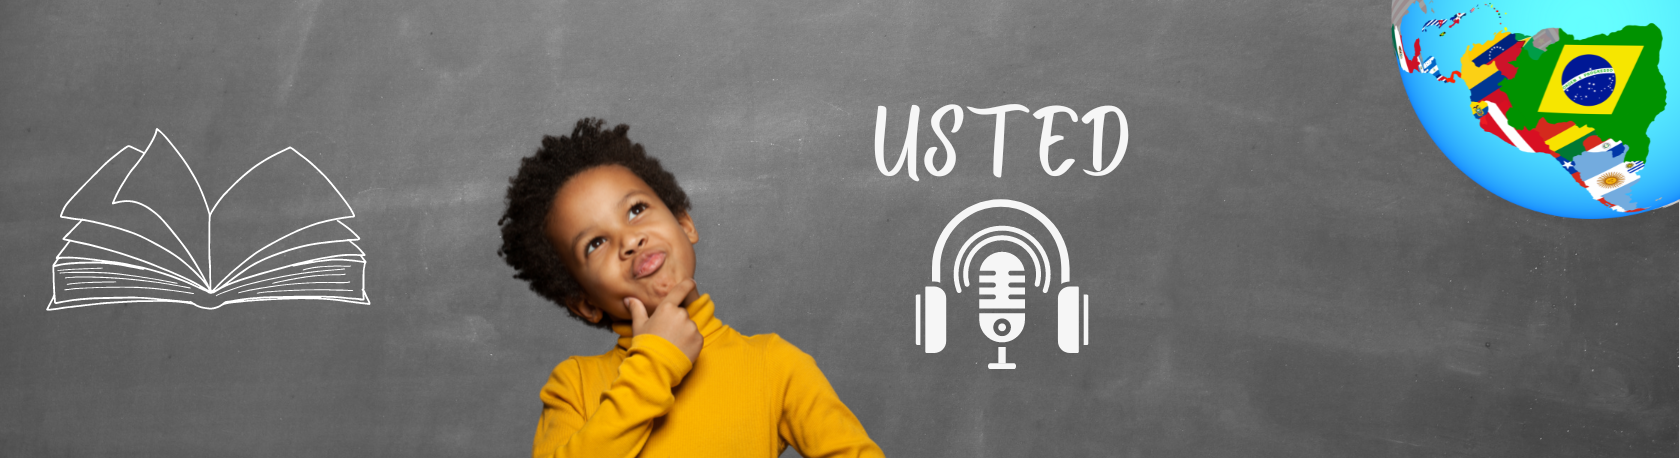 Master your Spanish listening skills and learn the fascinating history of the pronoun USTED